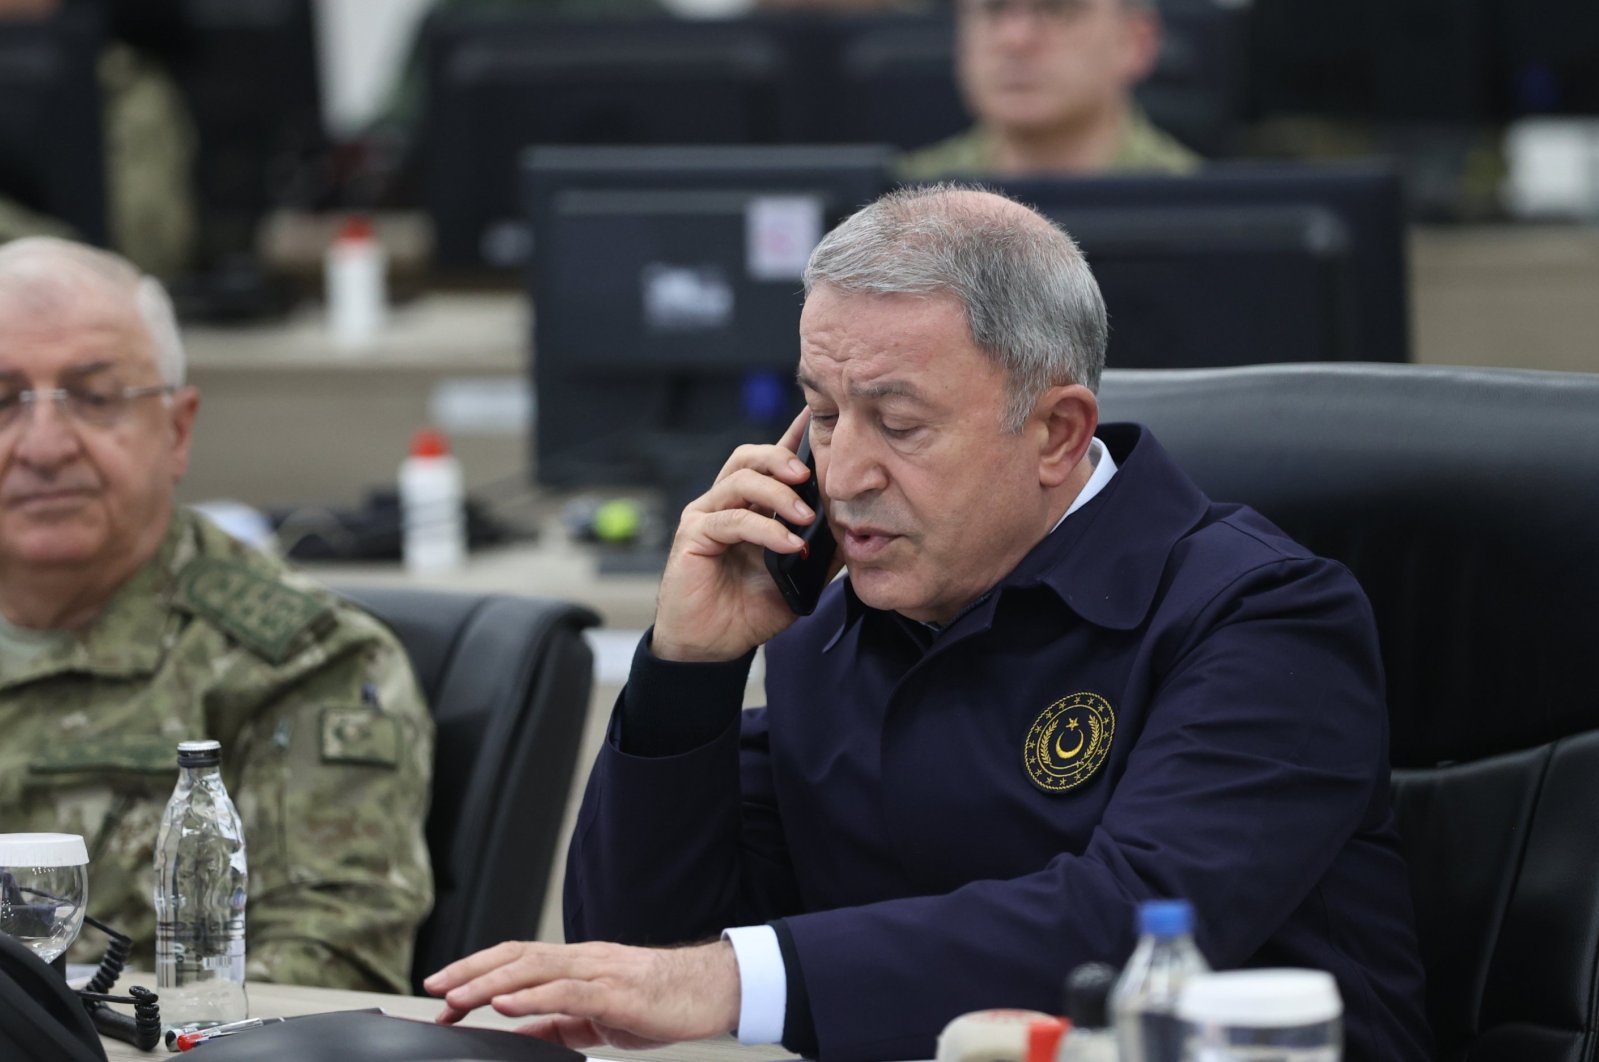 Defense Minister Hulusi Akar during his visit to the Land Forces Command Advanced Joint Operations Center in Şanlıurfa, Türkiye, May 2, 2022. (AA File Photo)